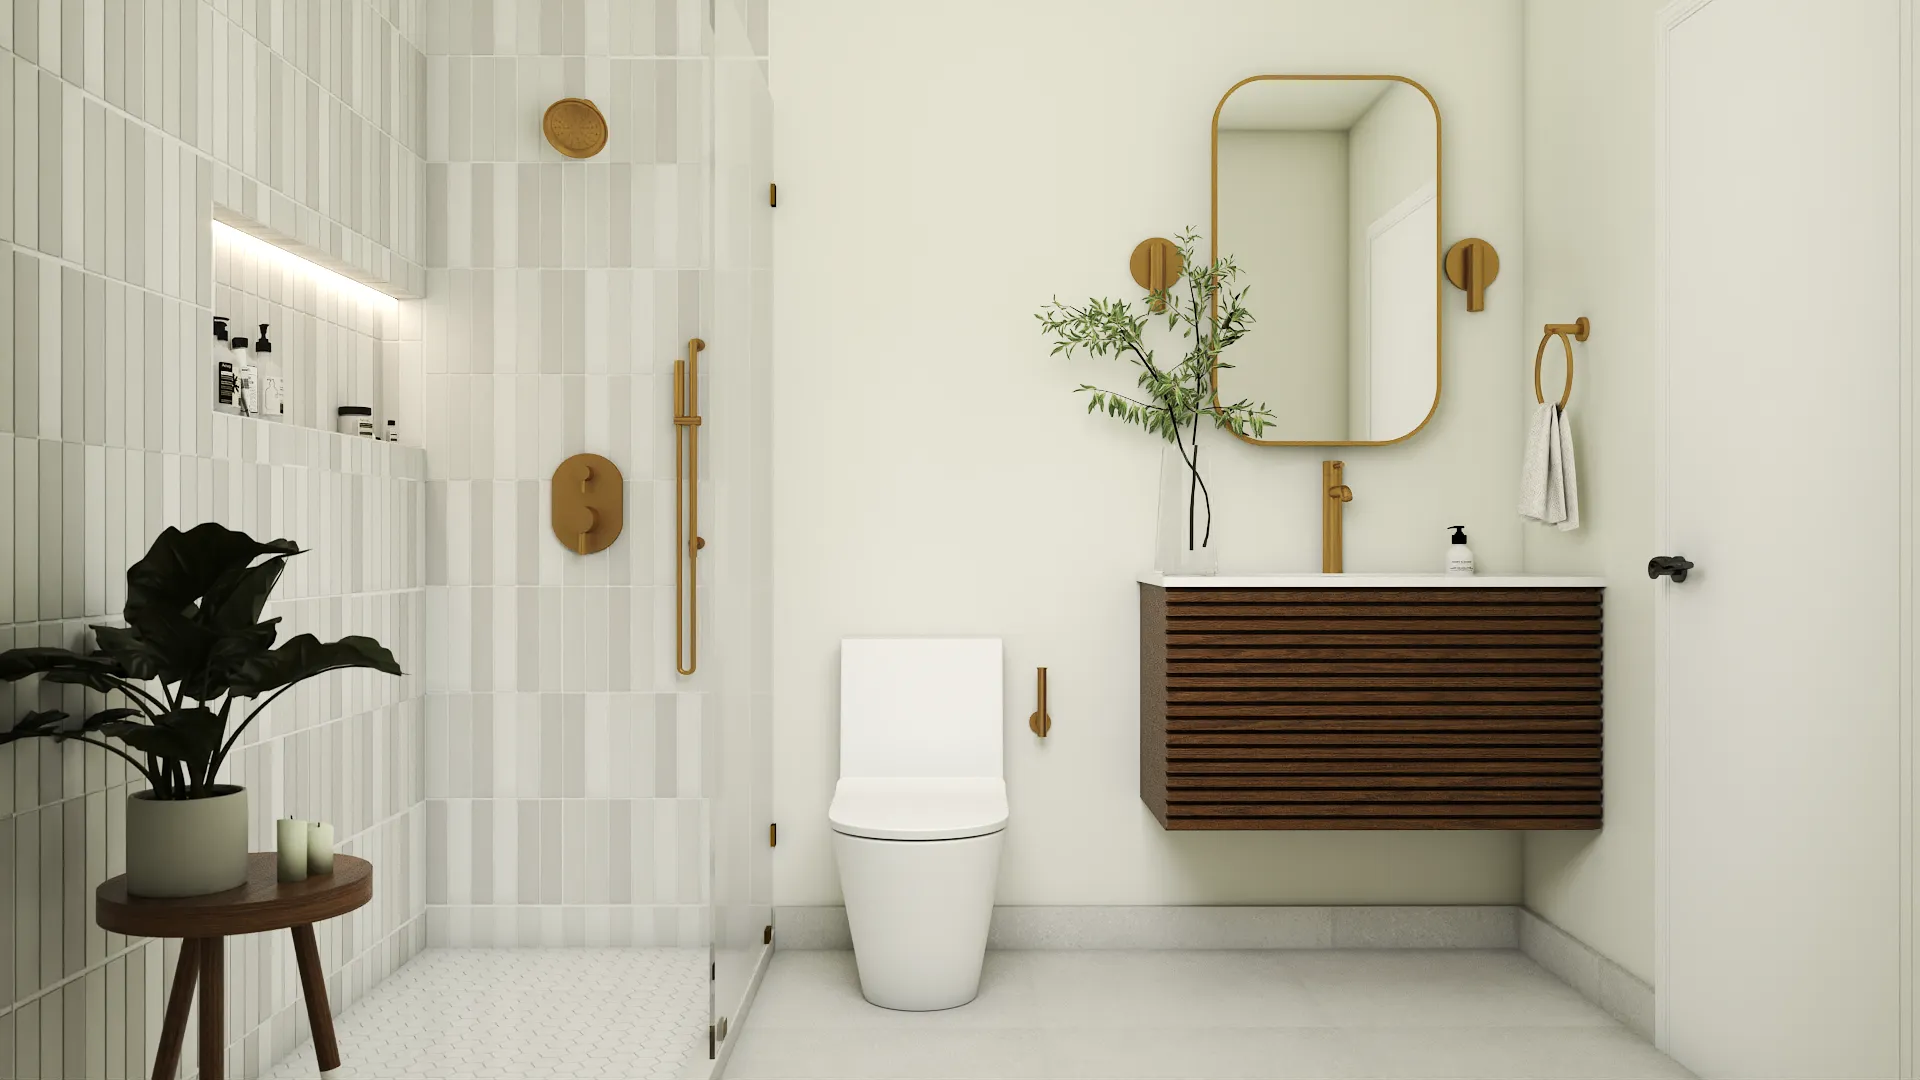 Serene minimalist bathroom featuring sleek white tiles, wooden vanity, and refreshing greenery, creating a peaceful and clean atmosphere. Design by Debora, an online interior design service.